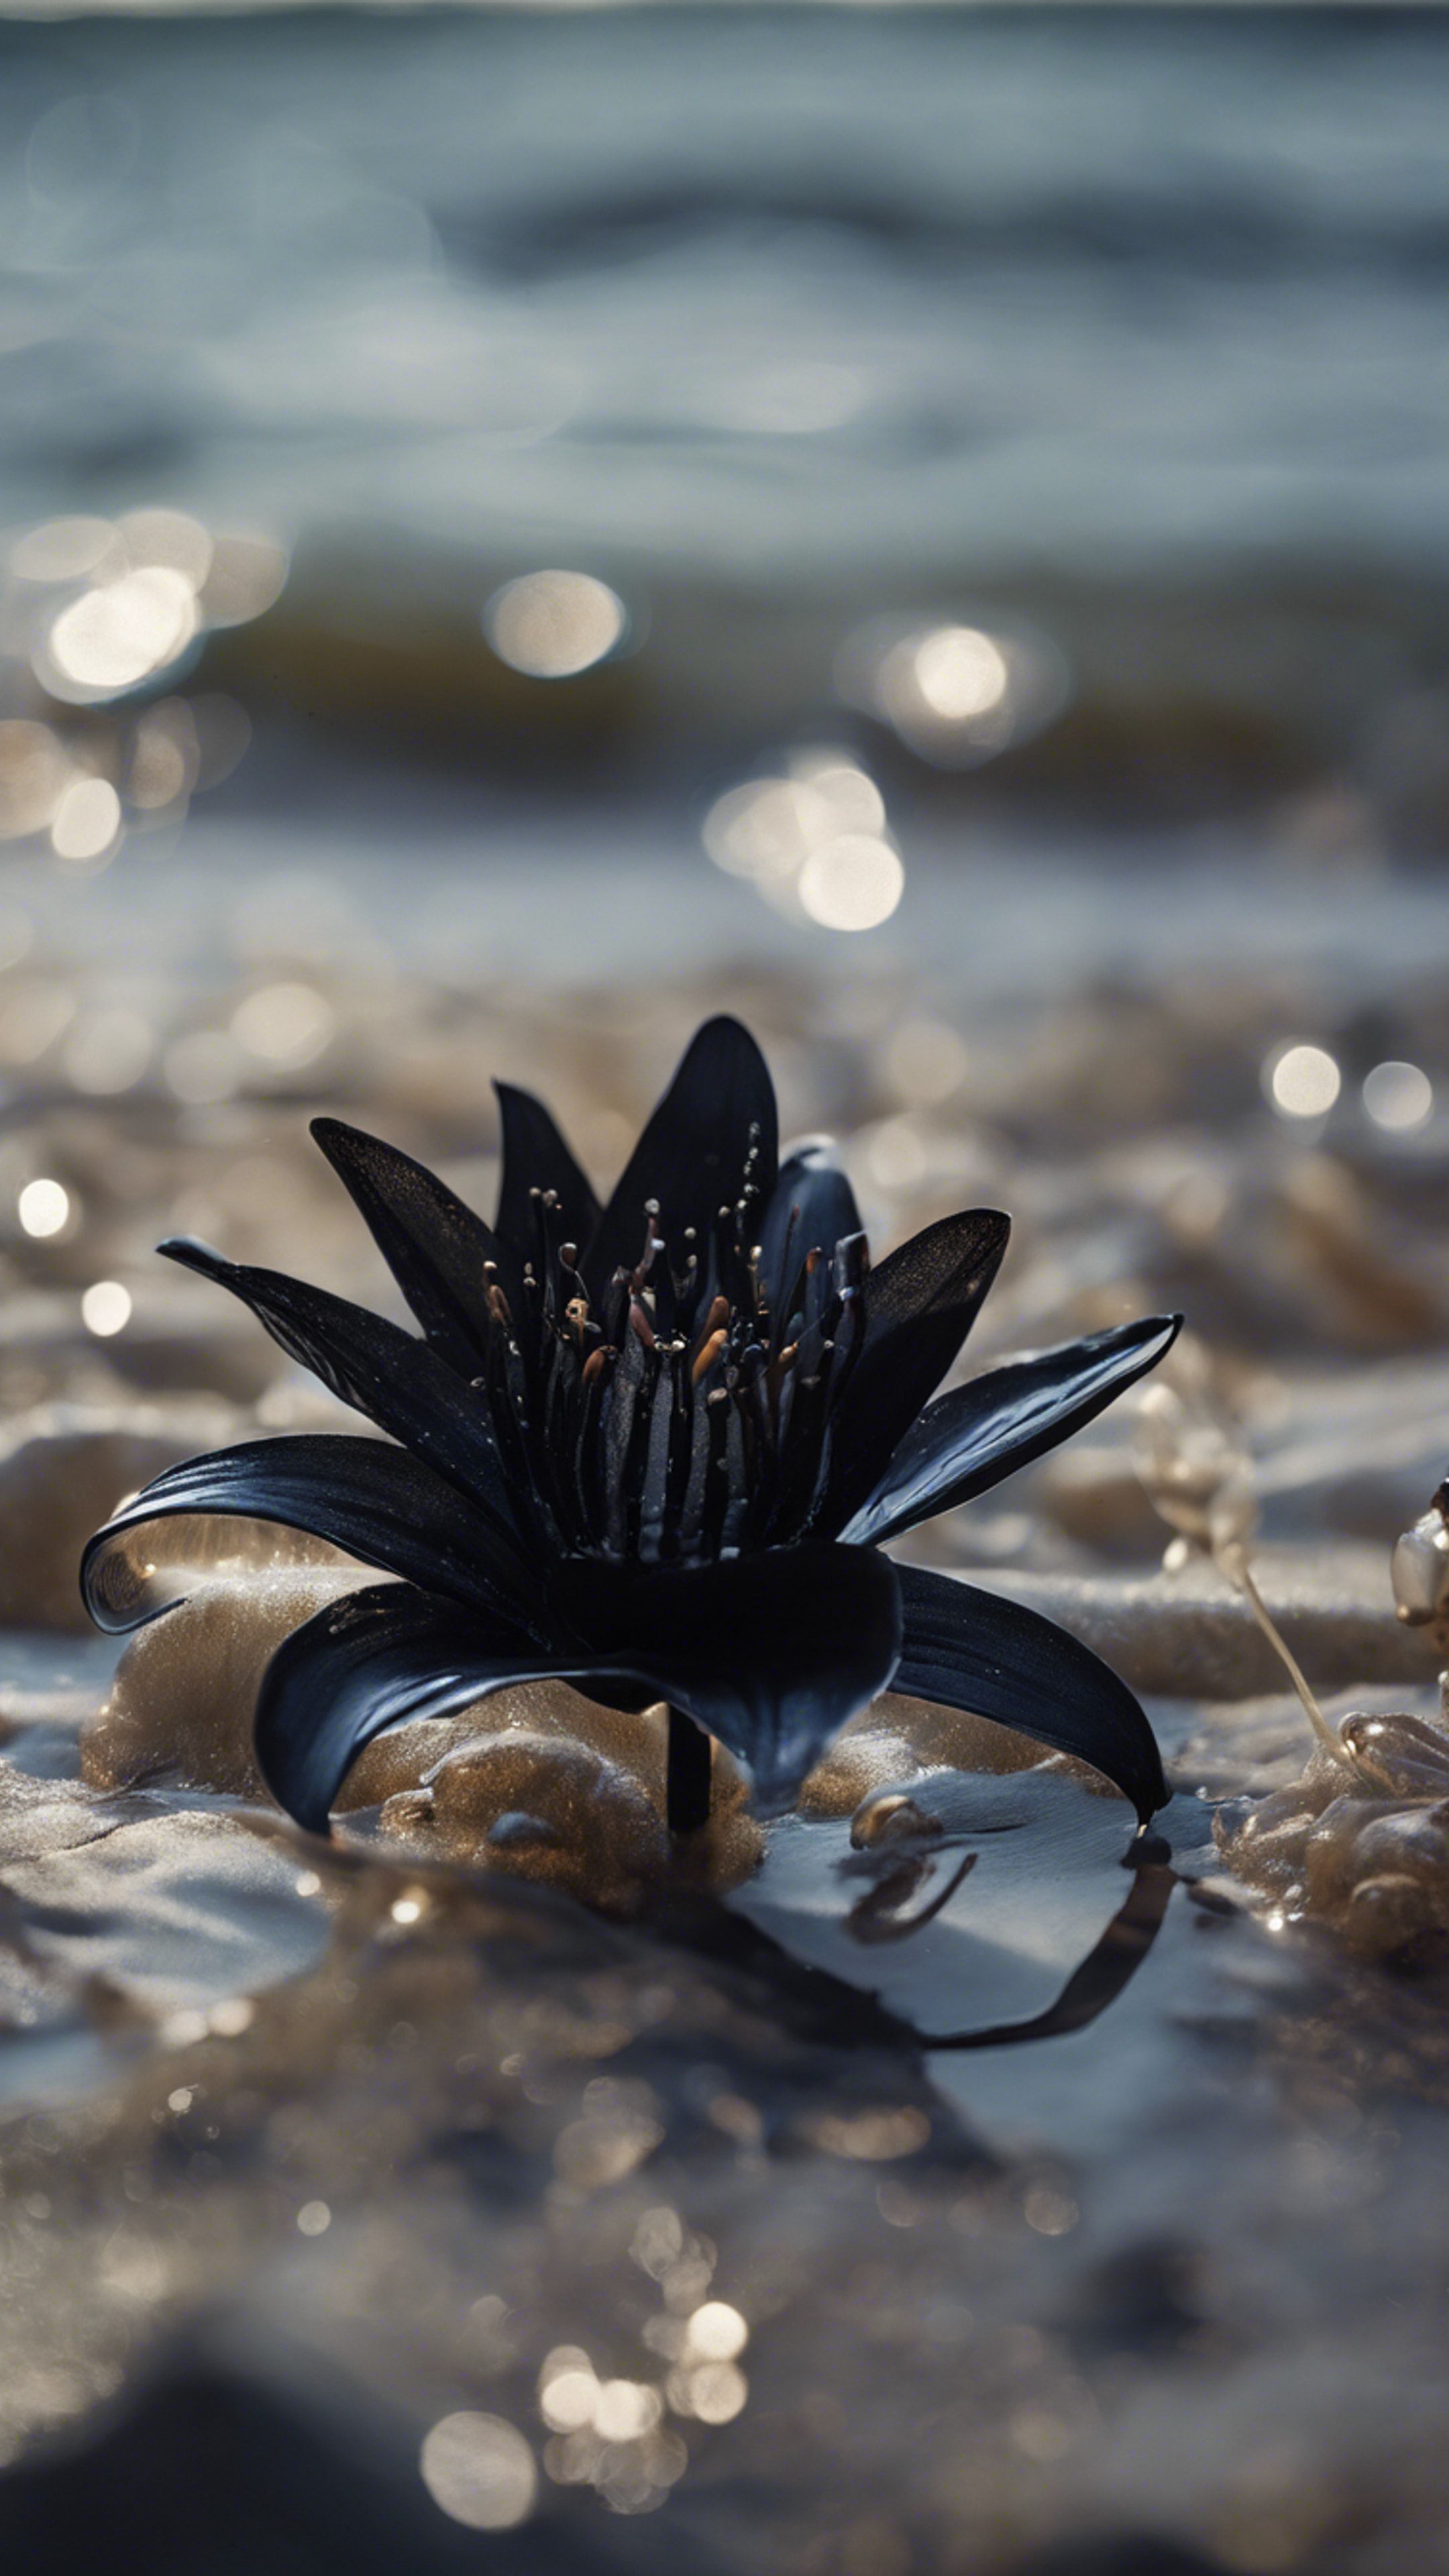 A black lily hiding under the tide, revealed only when the ocean pulls away, revealing the dark secrets of the sea bed. Wallpaper[3833c30c18c941348380]